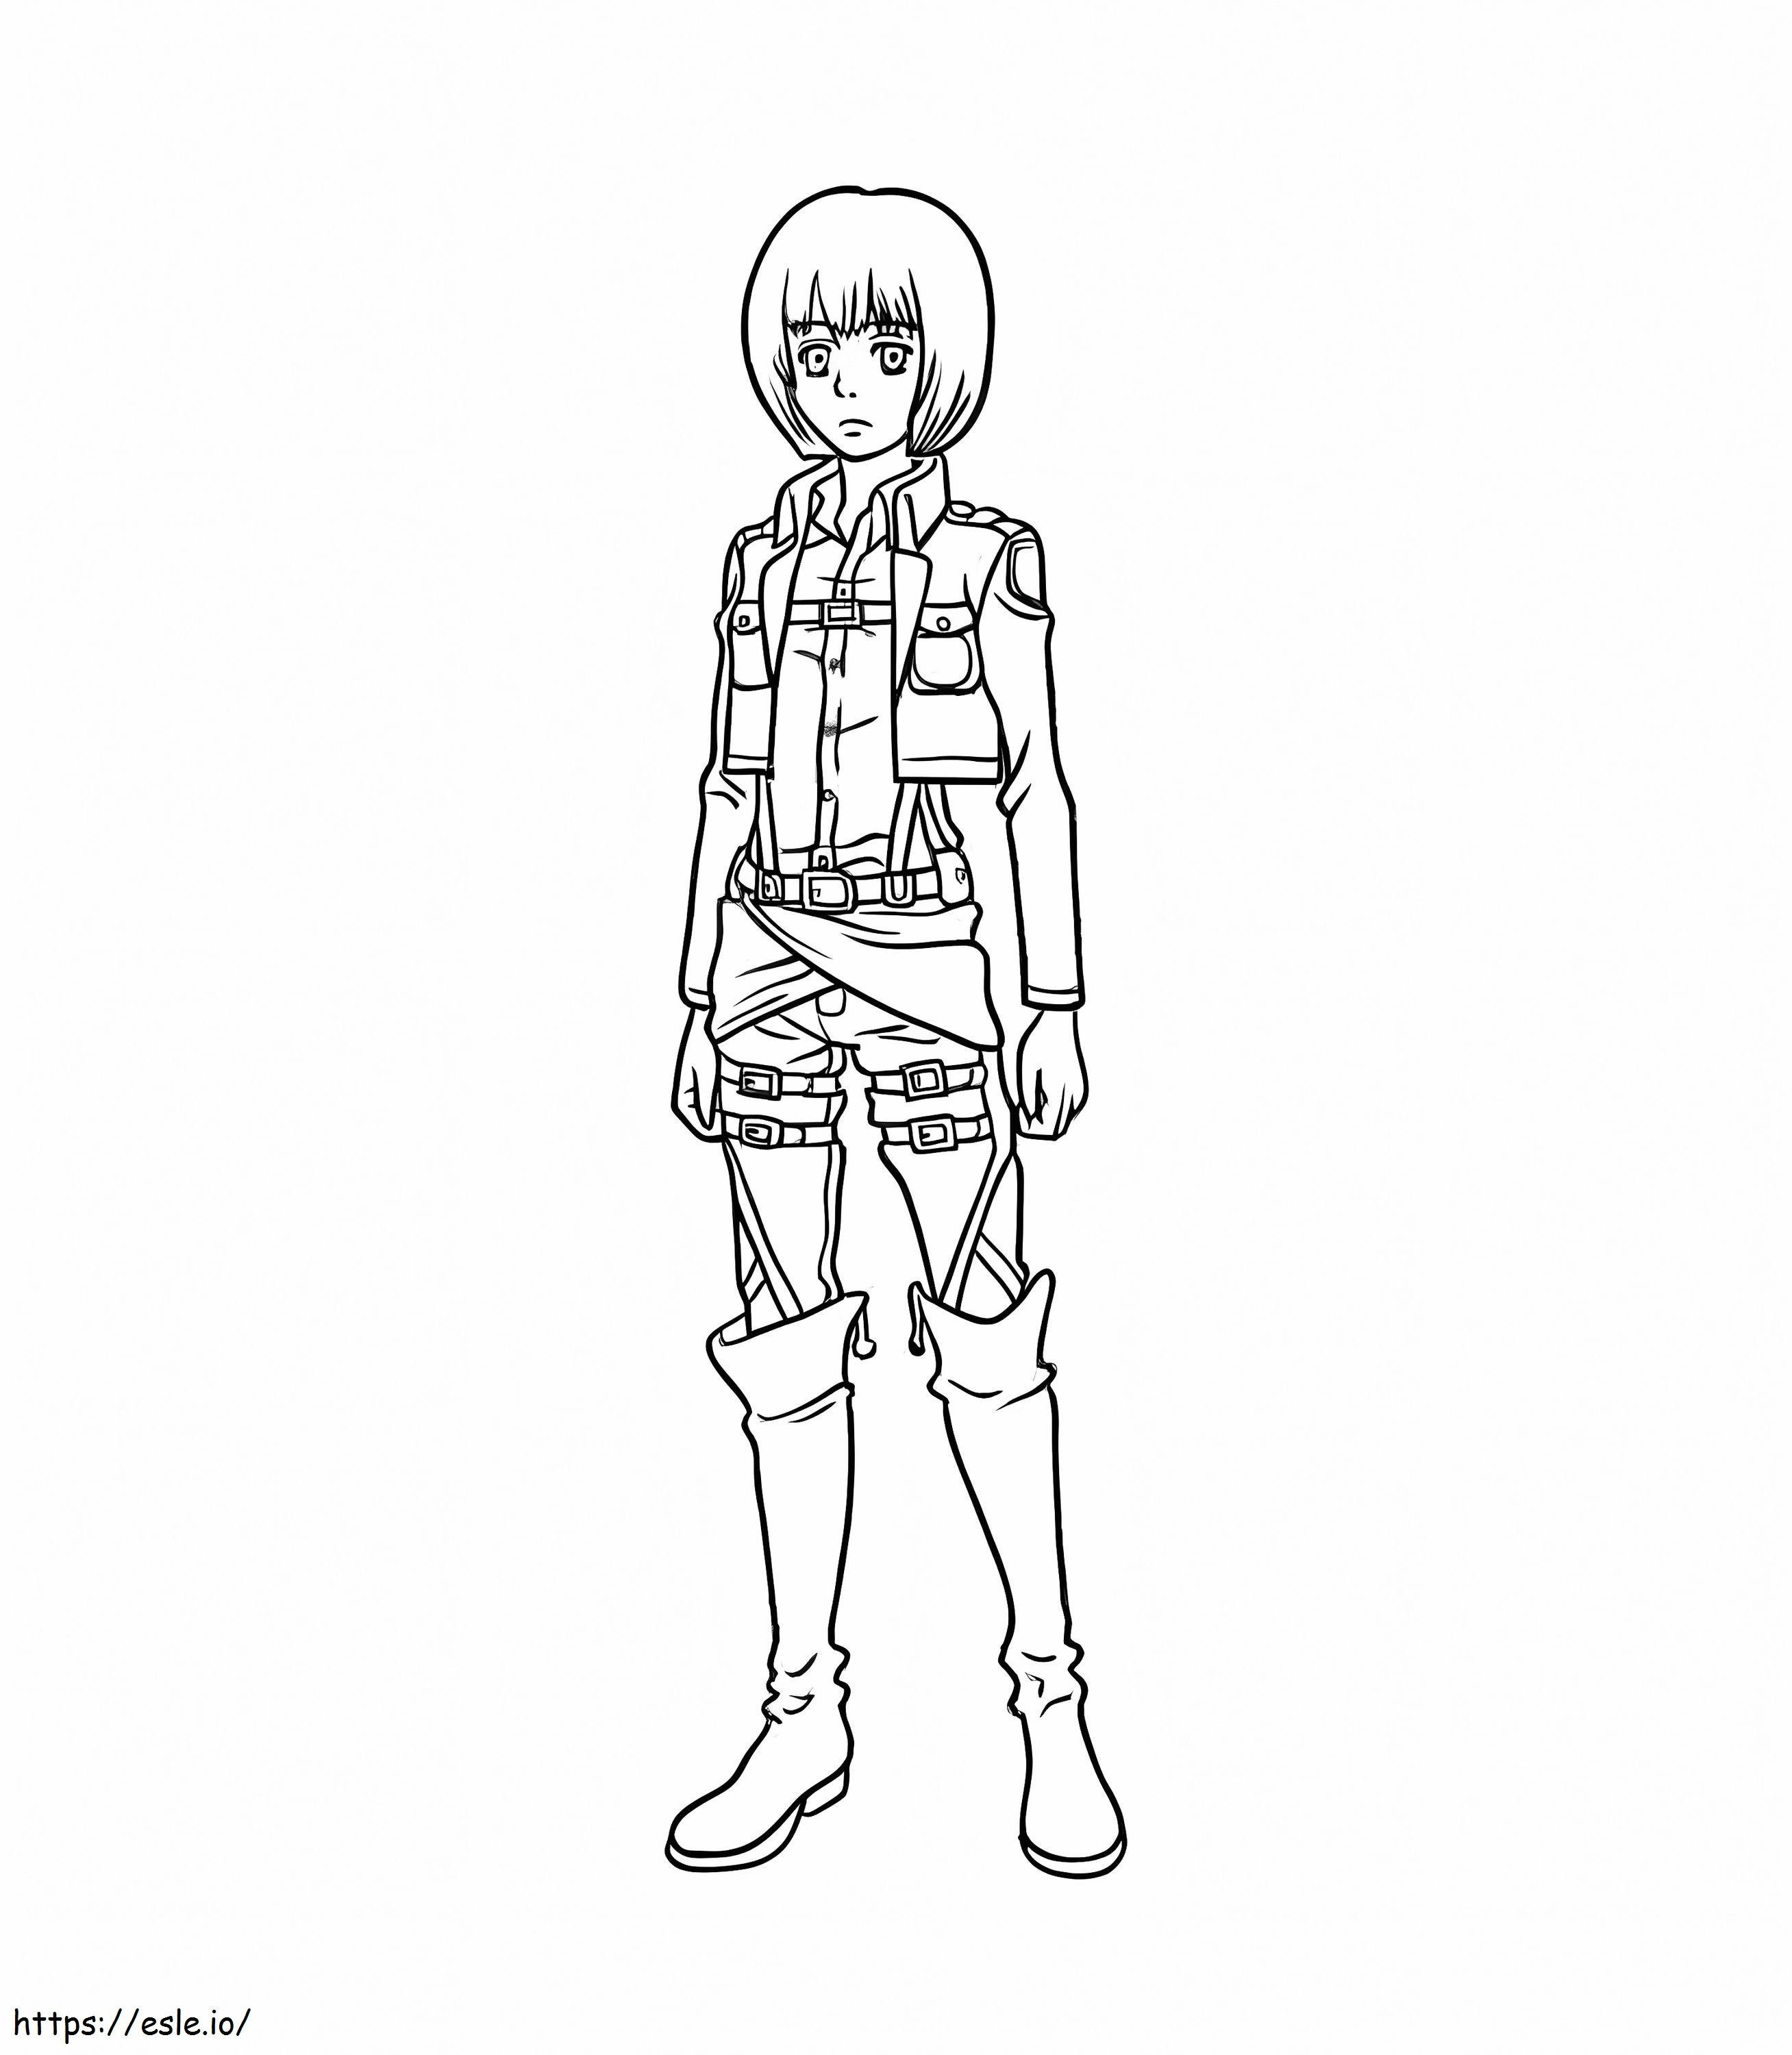 Animated Soldier coloring page